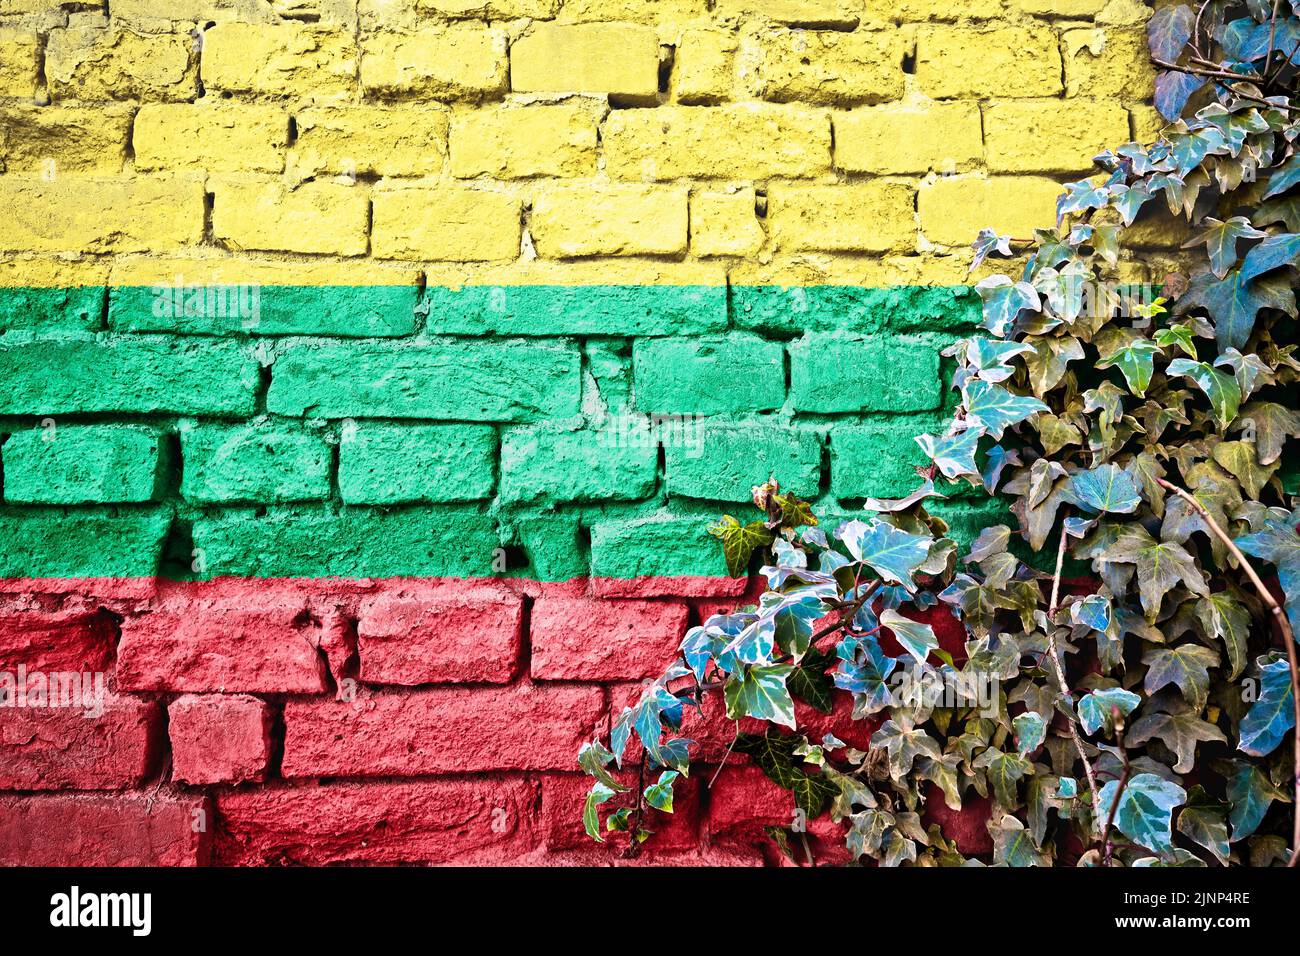 Lithuania grunge flag on brick wall with ivy plant, country symbol concept Stock Photo